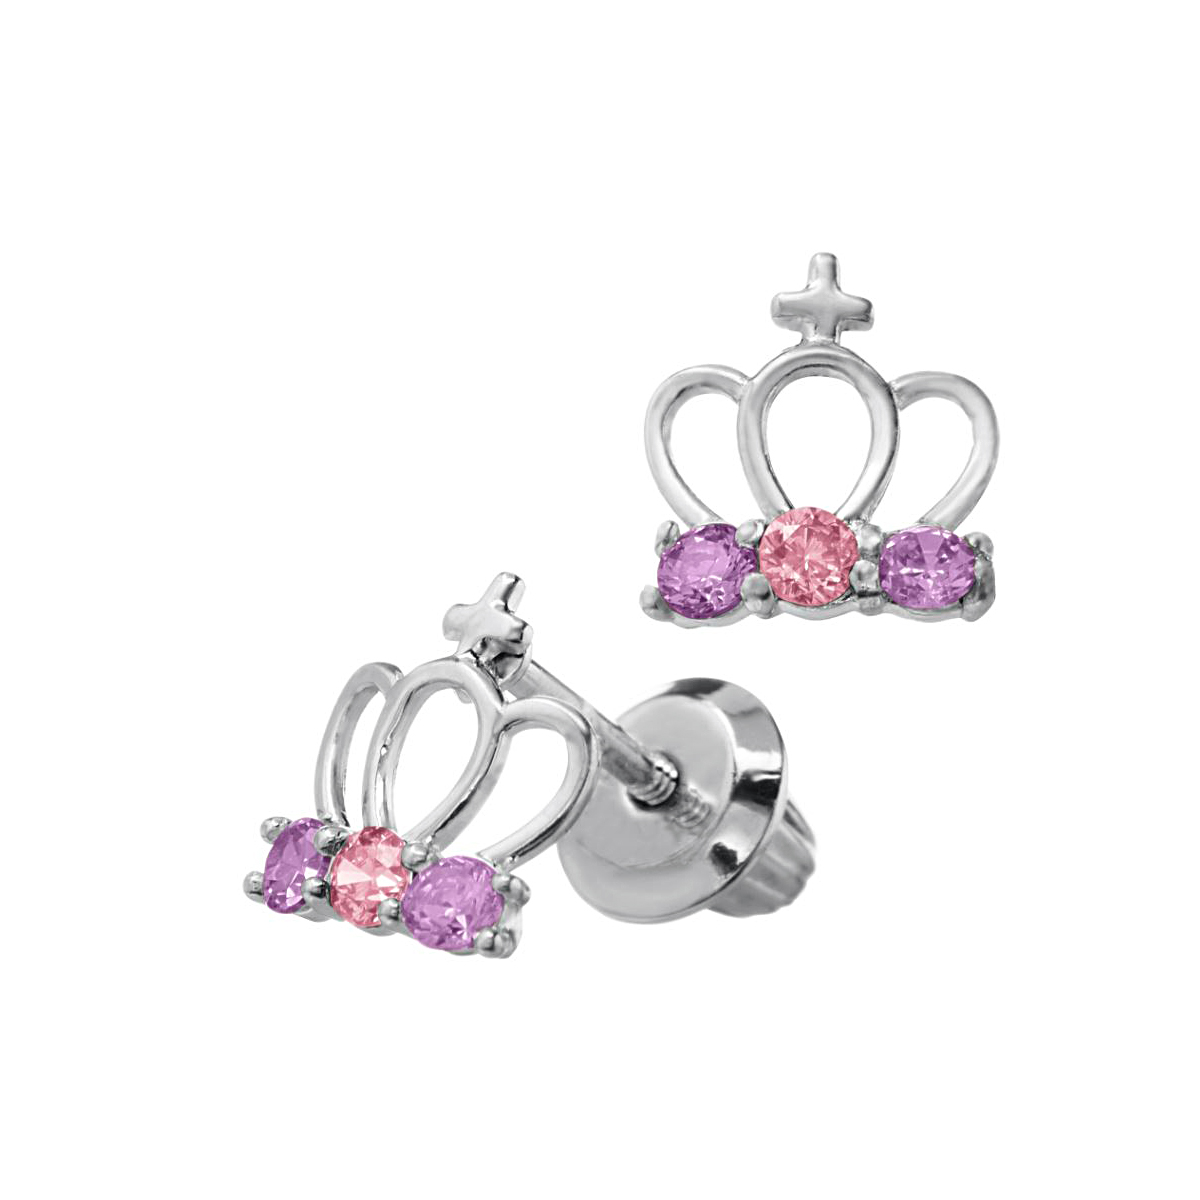 Marathon KK Sterling Silver Crown Earrings With Pink And Purple CZ Prong Set With Screw Backs.